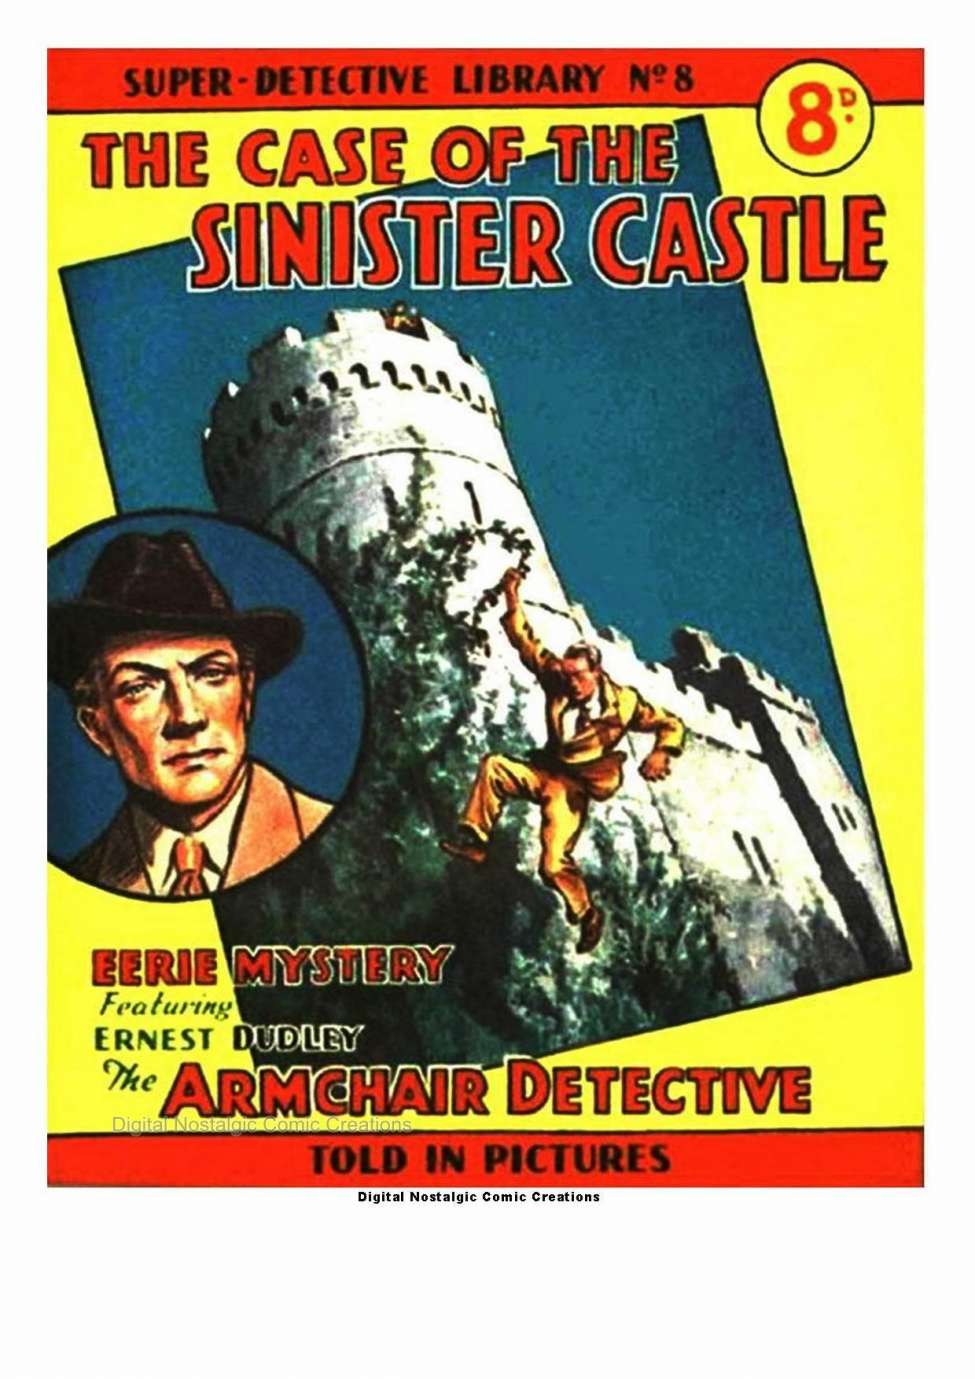 Book Cover For Super Detective Library 8 - The Case of The Sinister Castle